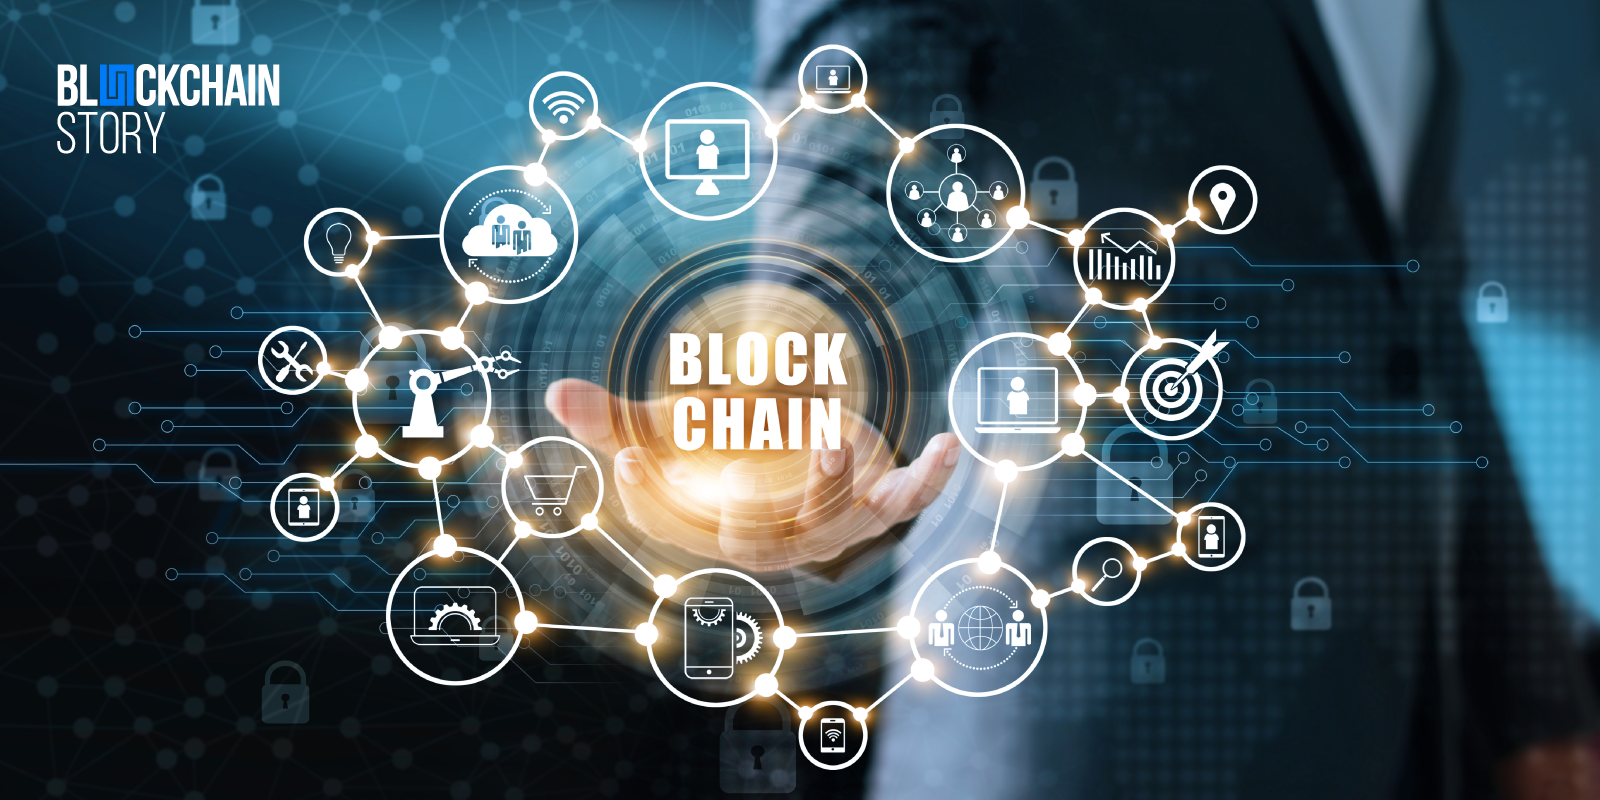 Six common myths about Blockchain, debunked

